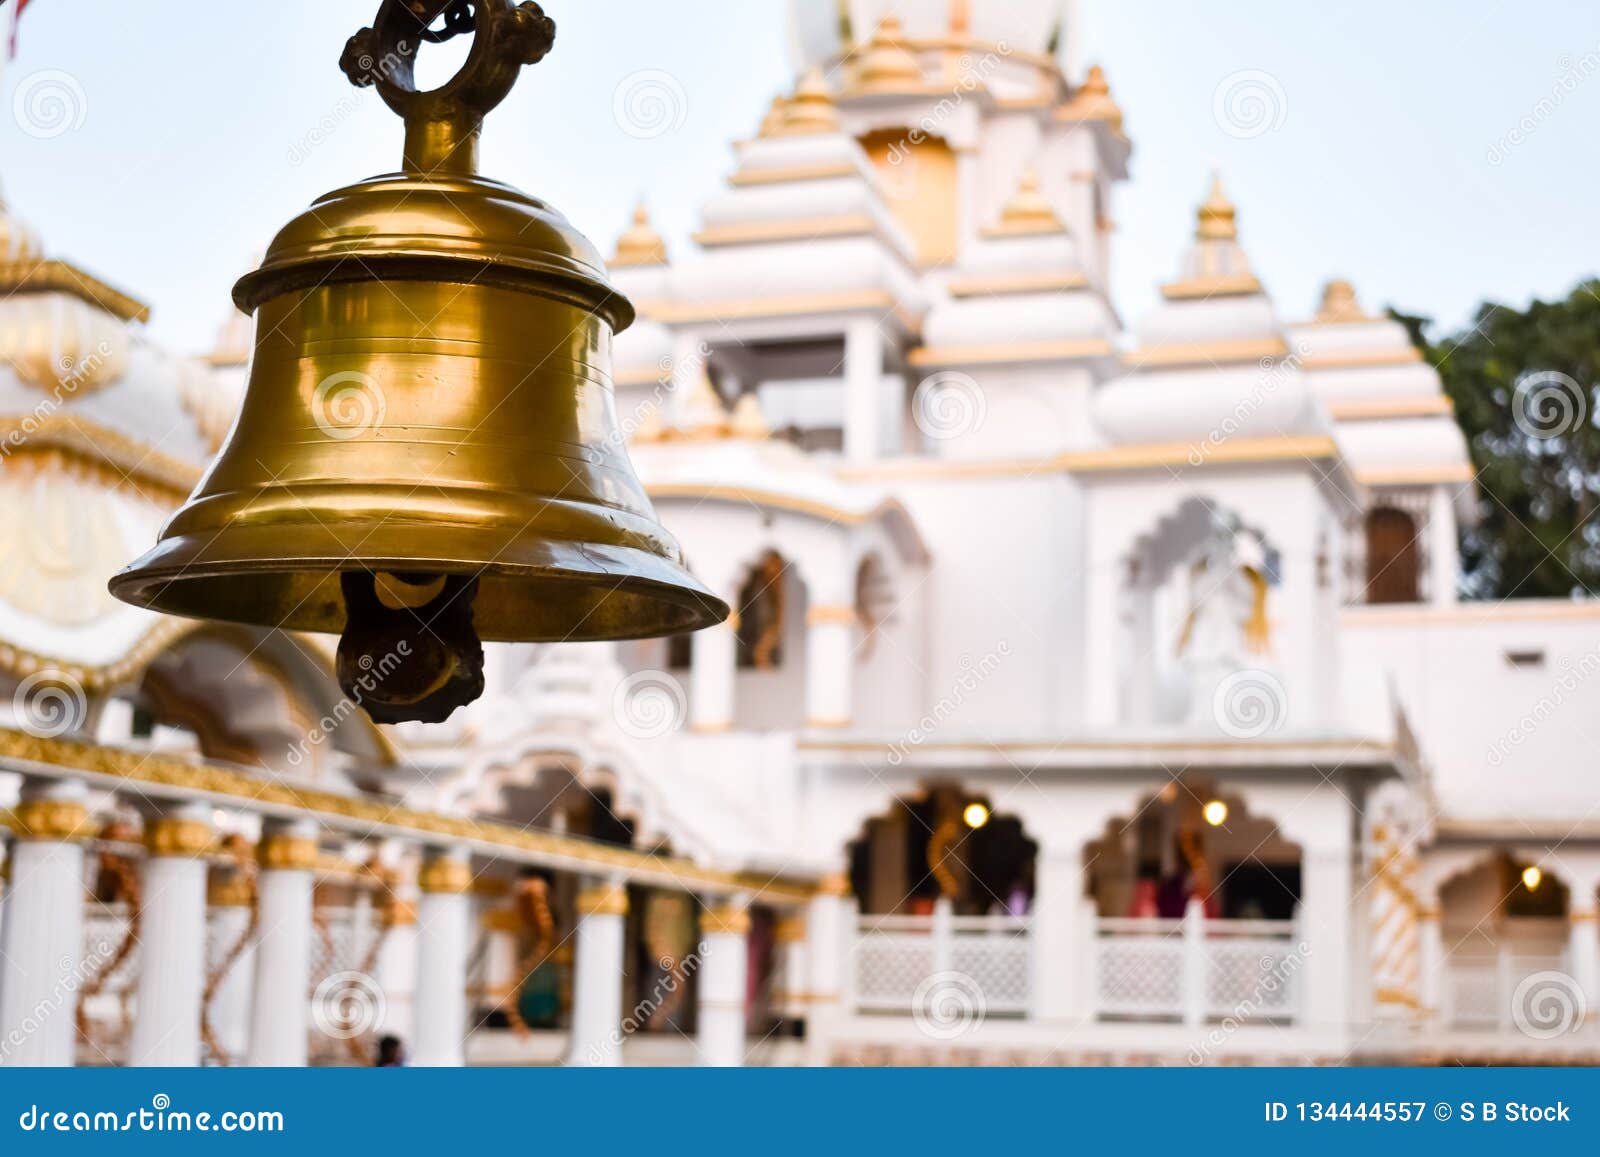 Why we ring the bell in temples - Rudra Centre